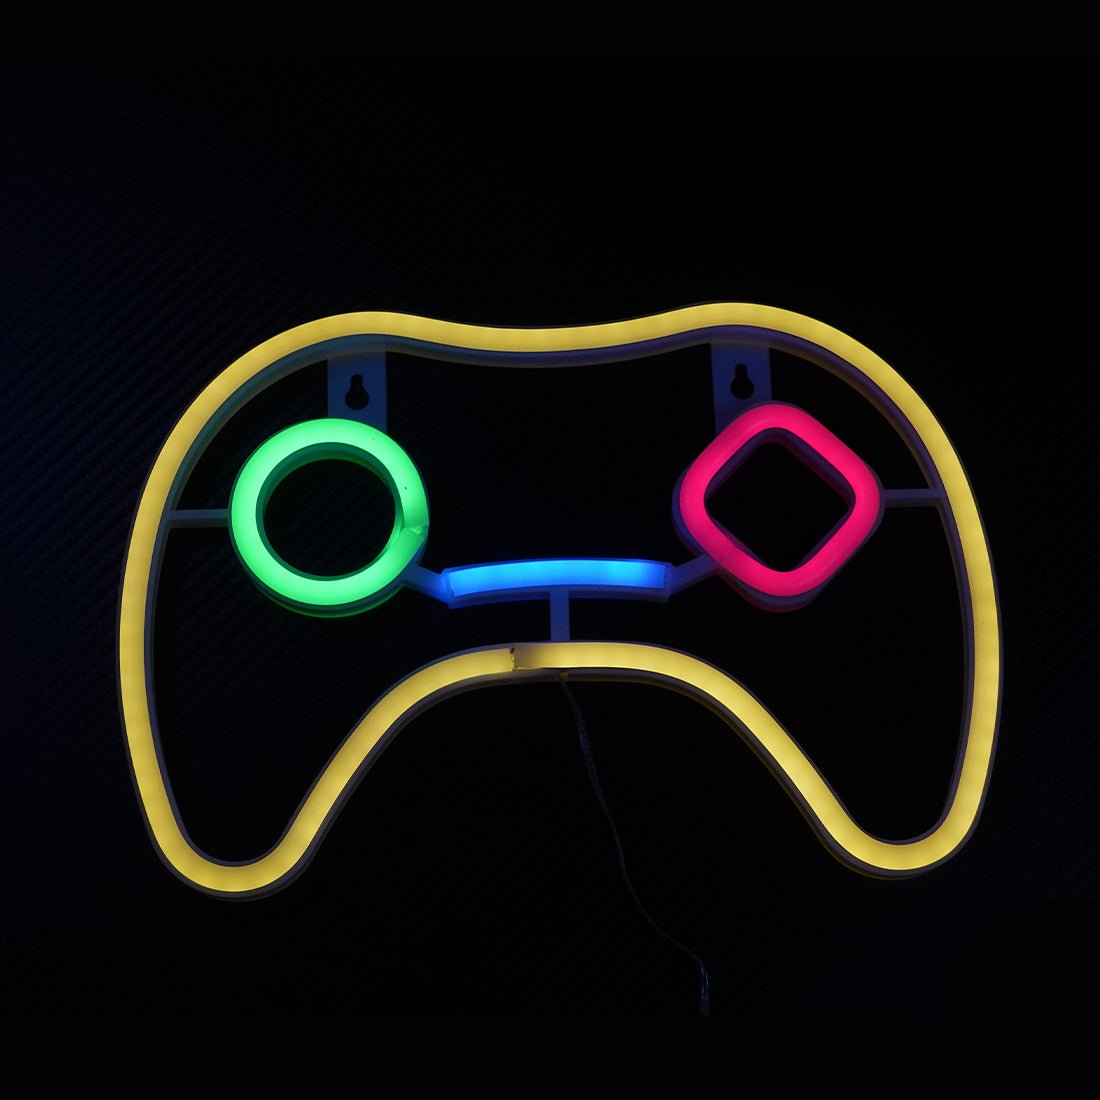 Led Neon Controller Shape - Red, Green & Yellow - إضاءة - Store 974 | ستور ٩٧٤